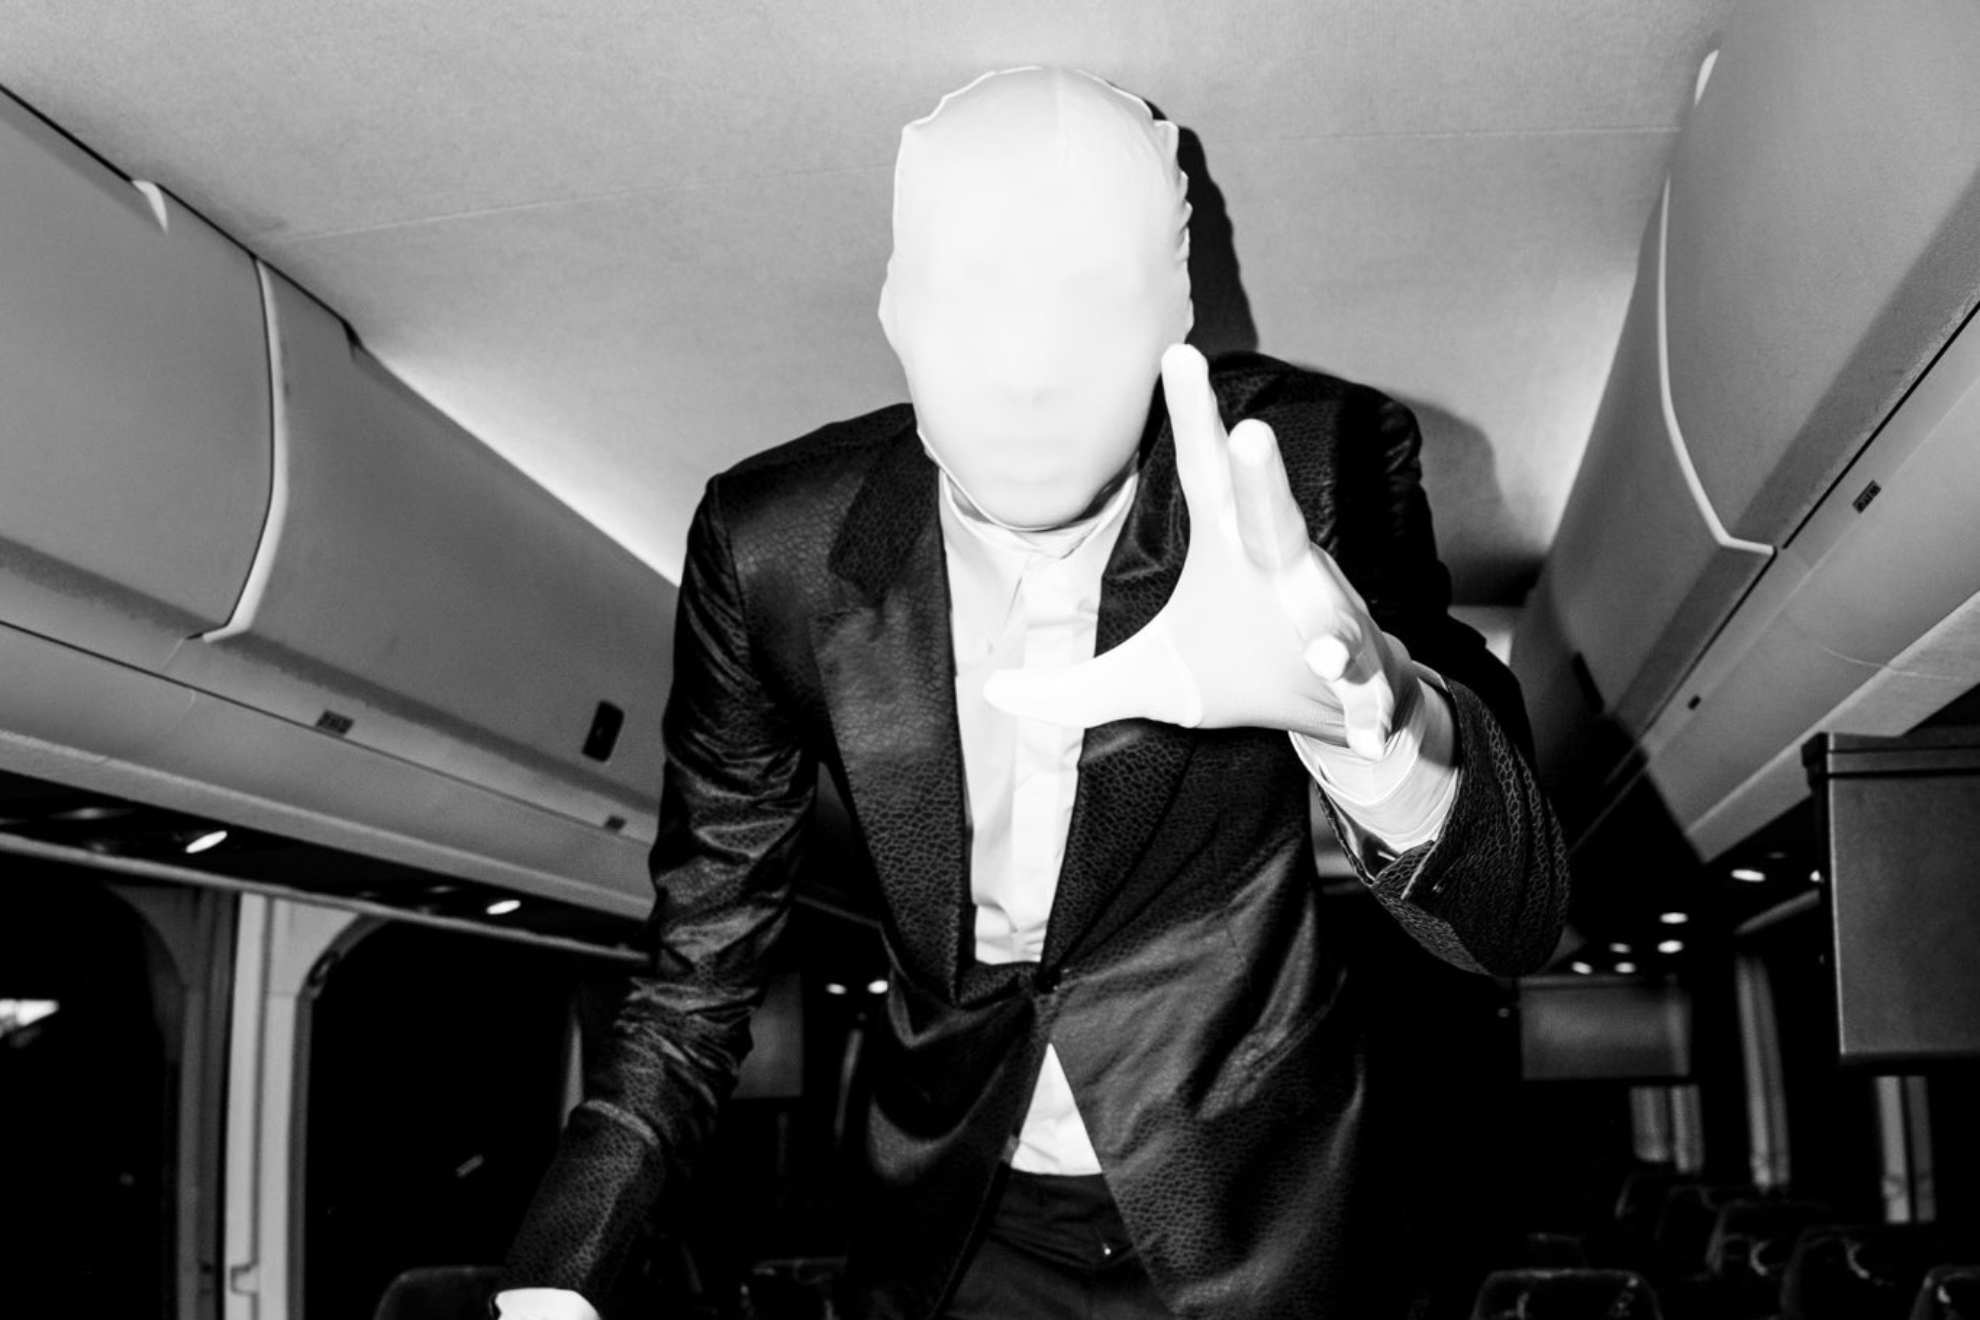 The new NBA star surprised everyone with this costume of Slenderman, a horror character from movies and video games. His stature and wingspan make the costume even more realistic.